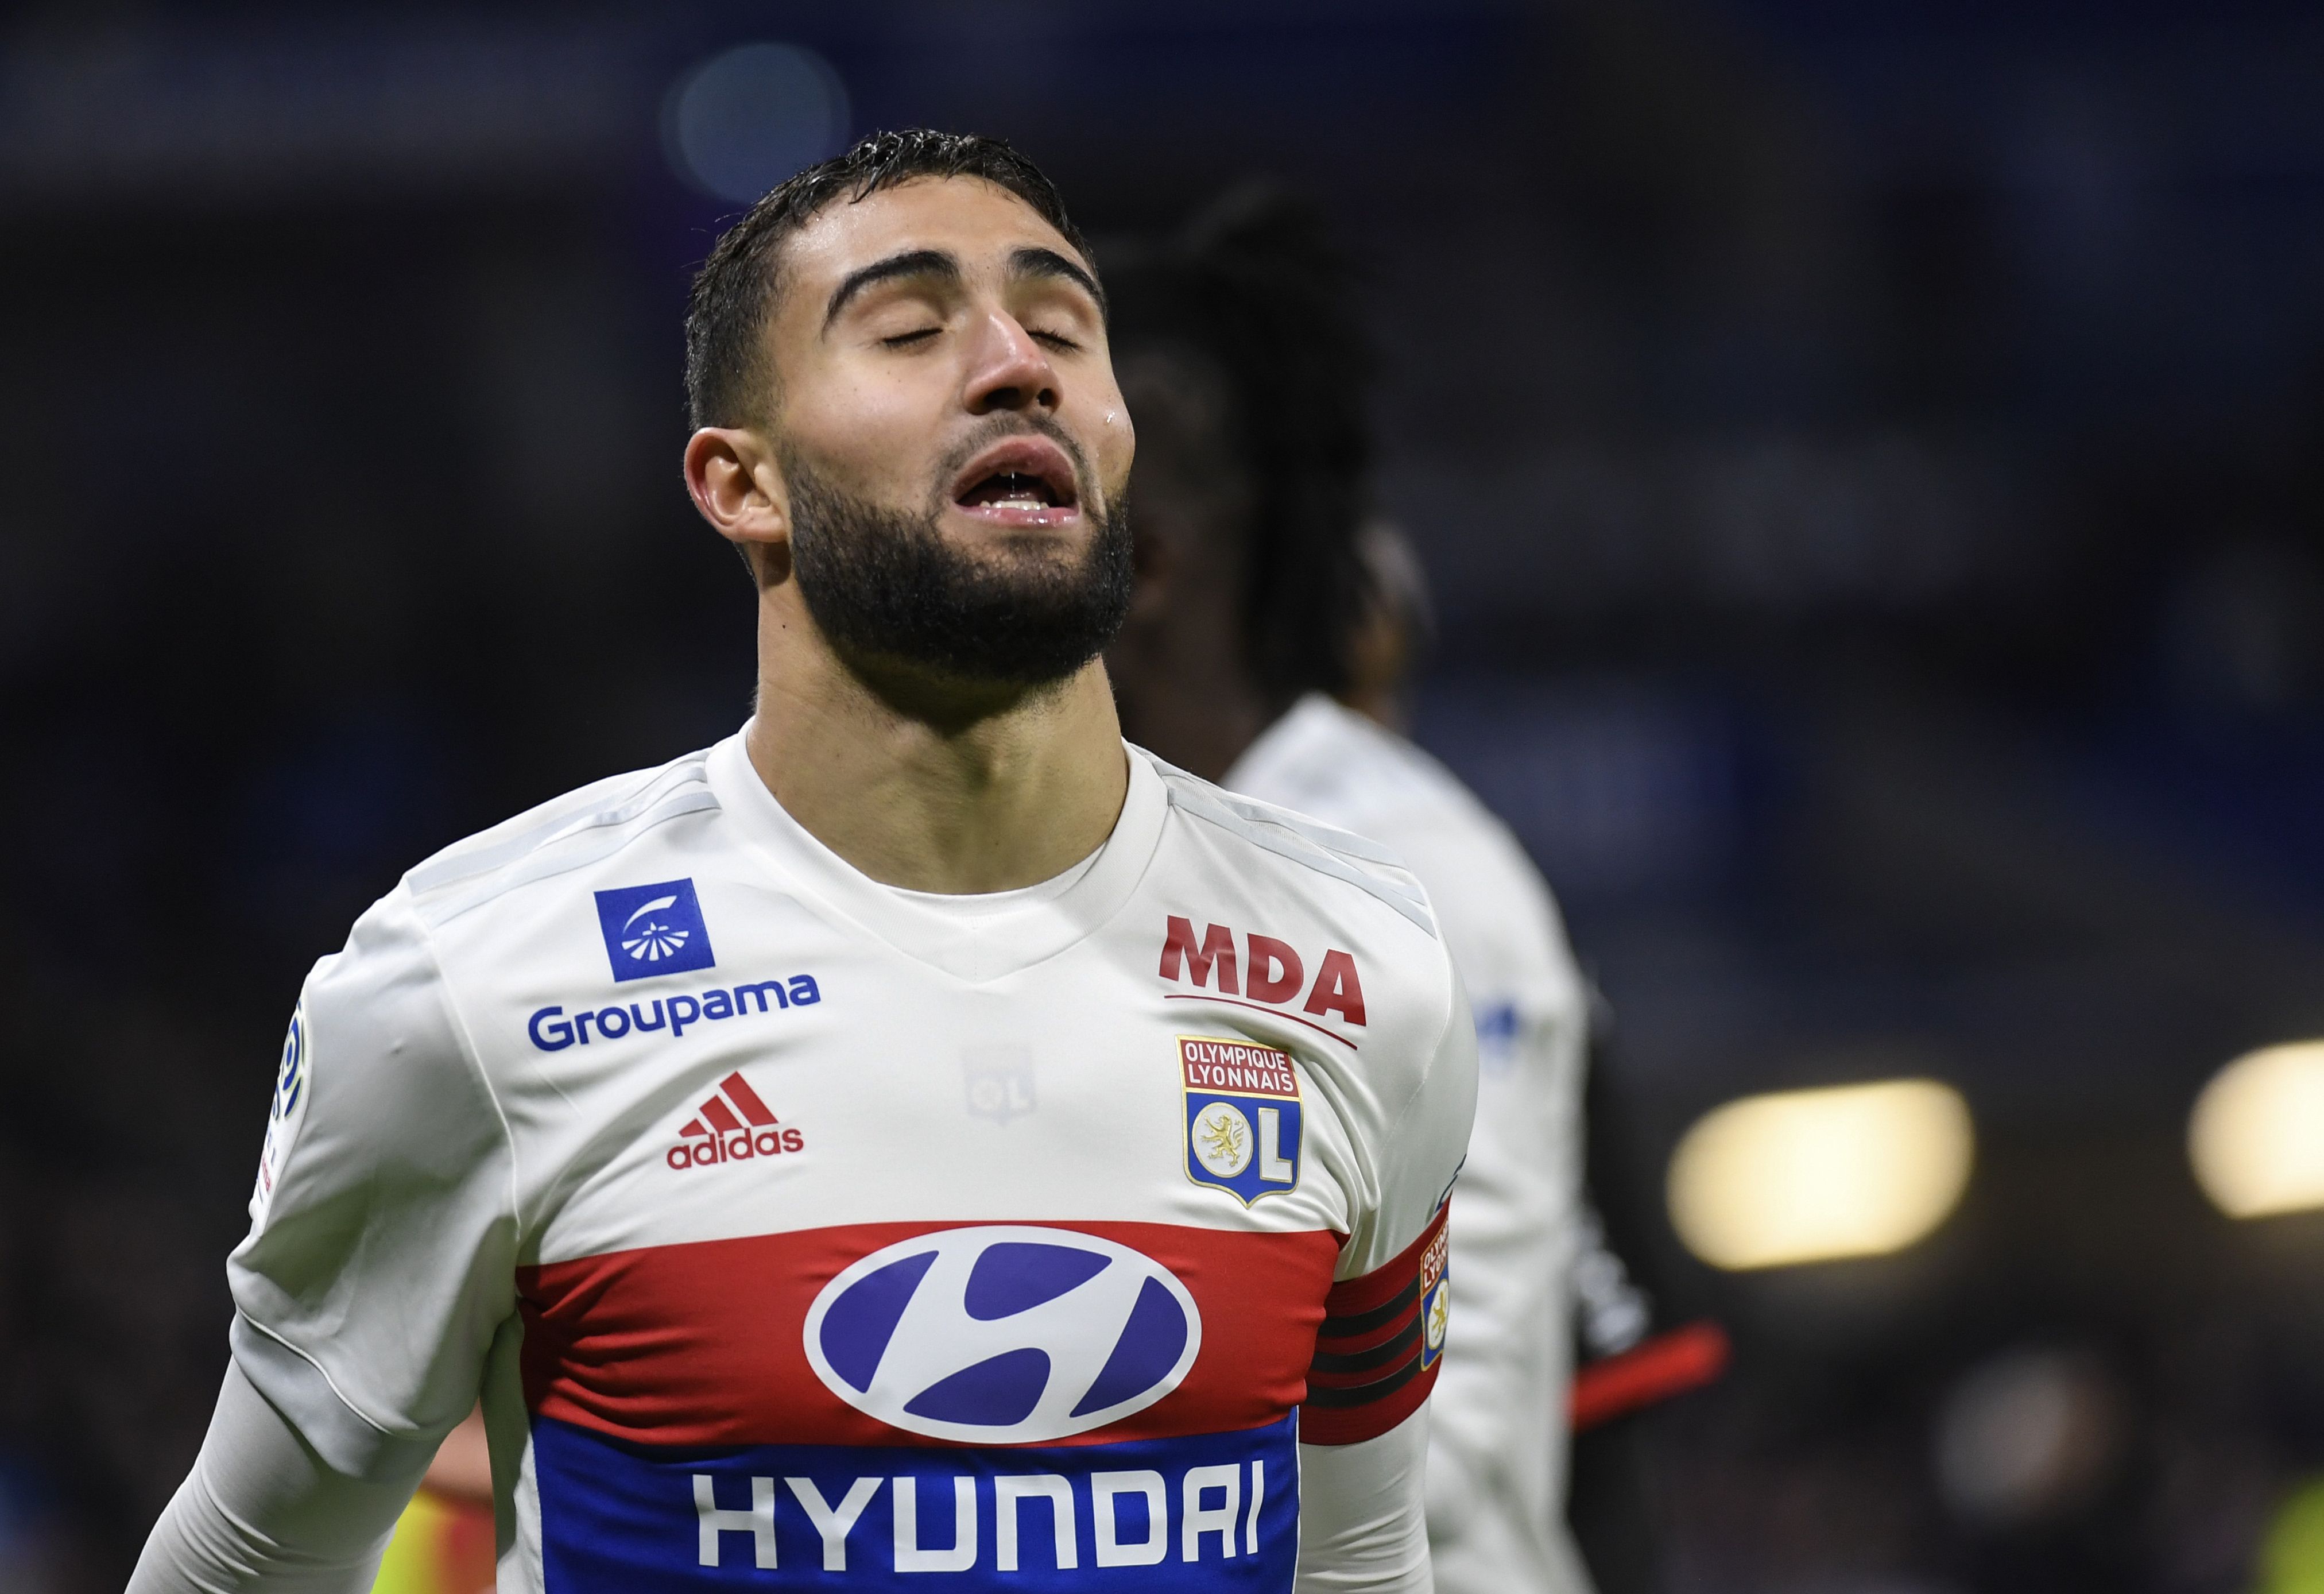 Lyon's French midfielder Nabil Fekir reacts after missing a goal opportunity  during the French L1 football match between Lyon (OL) and Rennes (SRFC) on February 11, 2018, at the Groupama Stadium in Decines-Charpieu near Lyon, central-eastern France.  / AFP PHOTO / PHILIPPE DESMAZES        (Photo credit should read PHILIPPE DESMAZES/AFP/Getty Images)